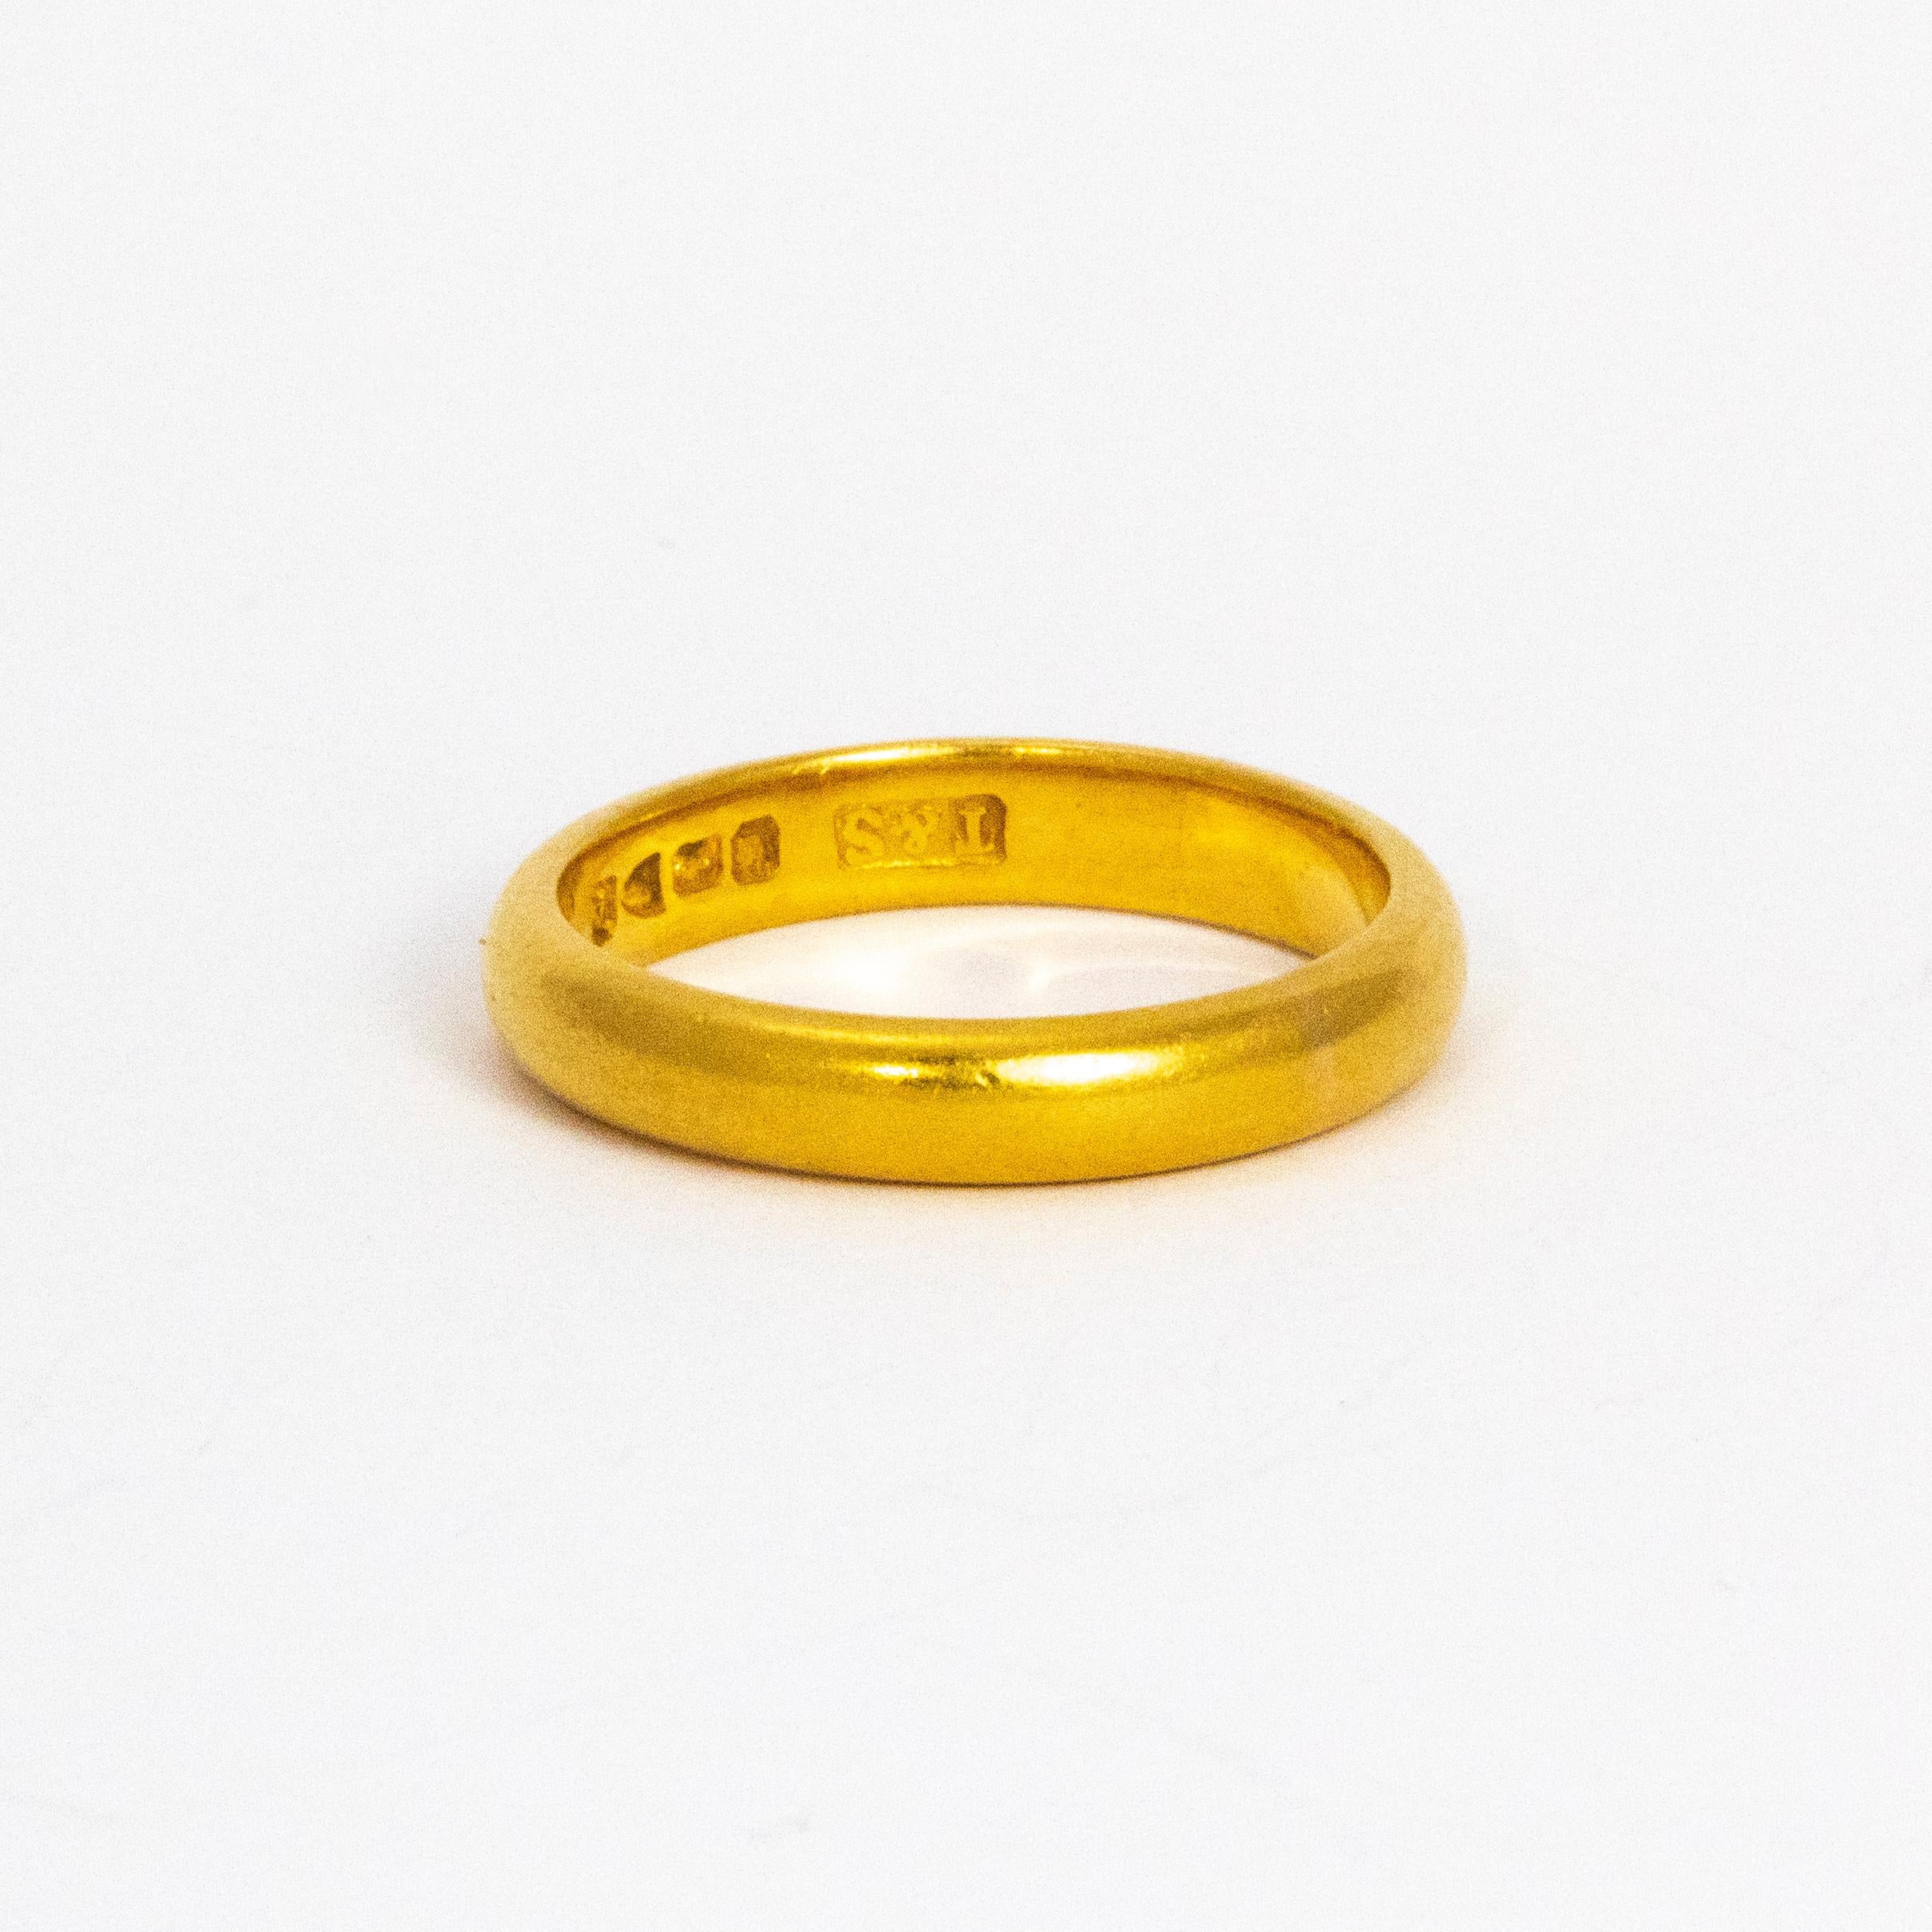 Glossy 22ct gold band, perfect for a wedding band or just a simple everyday piece.

Ring Size: N or 6 3/4